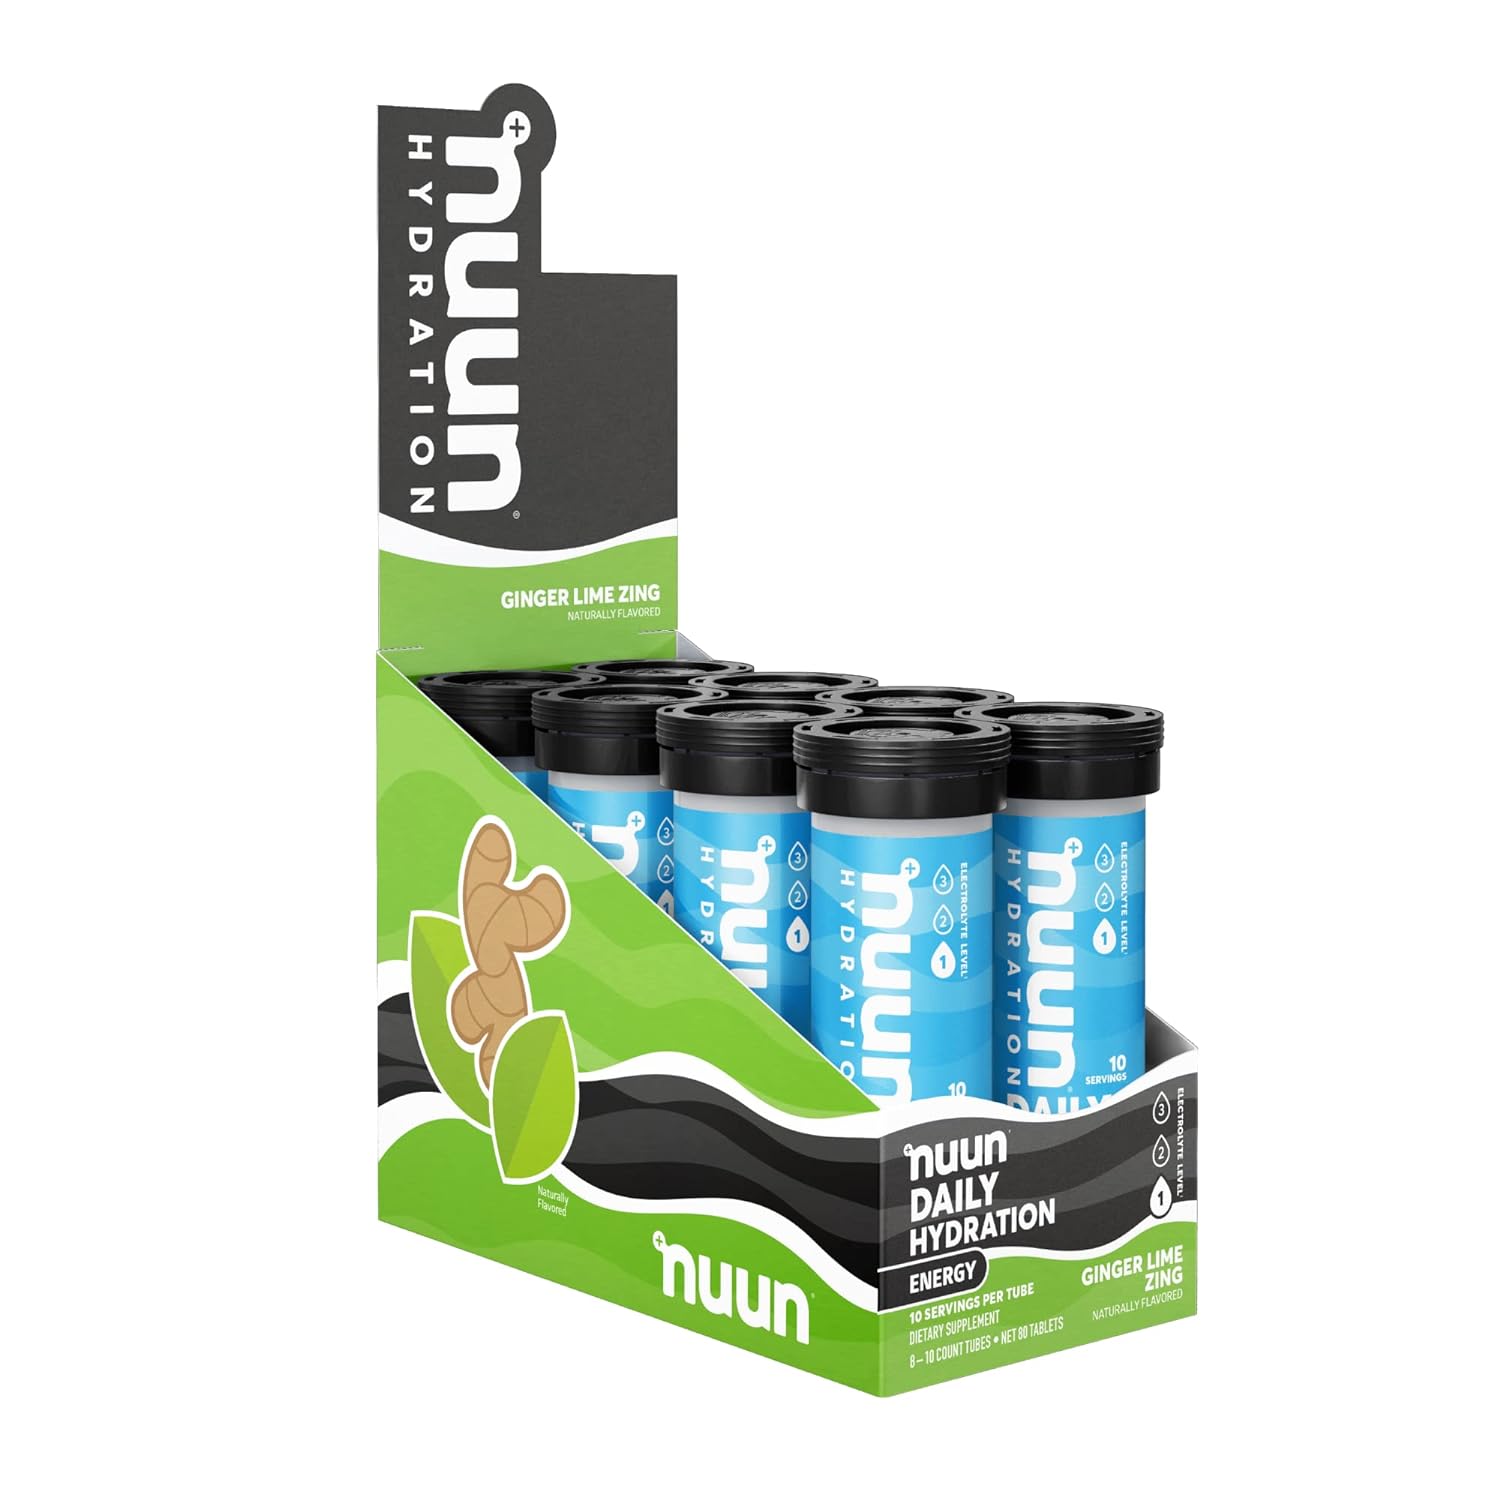 80-Count Nuun Energy + Caffeine Hydration Electrolyte Drink Tablets (Ginger Lime Zing) $20.91 w/ S&S + Free Shipping w/ Prime or on $35+